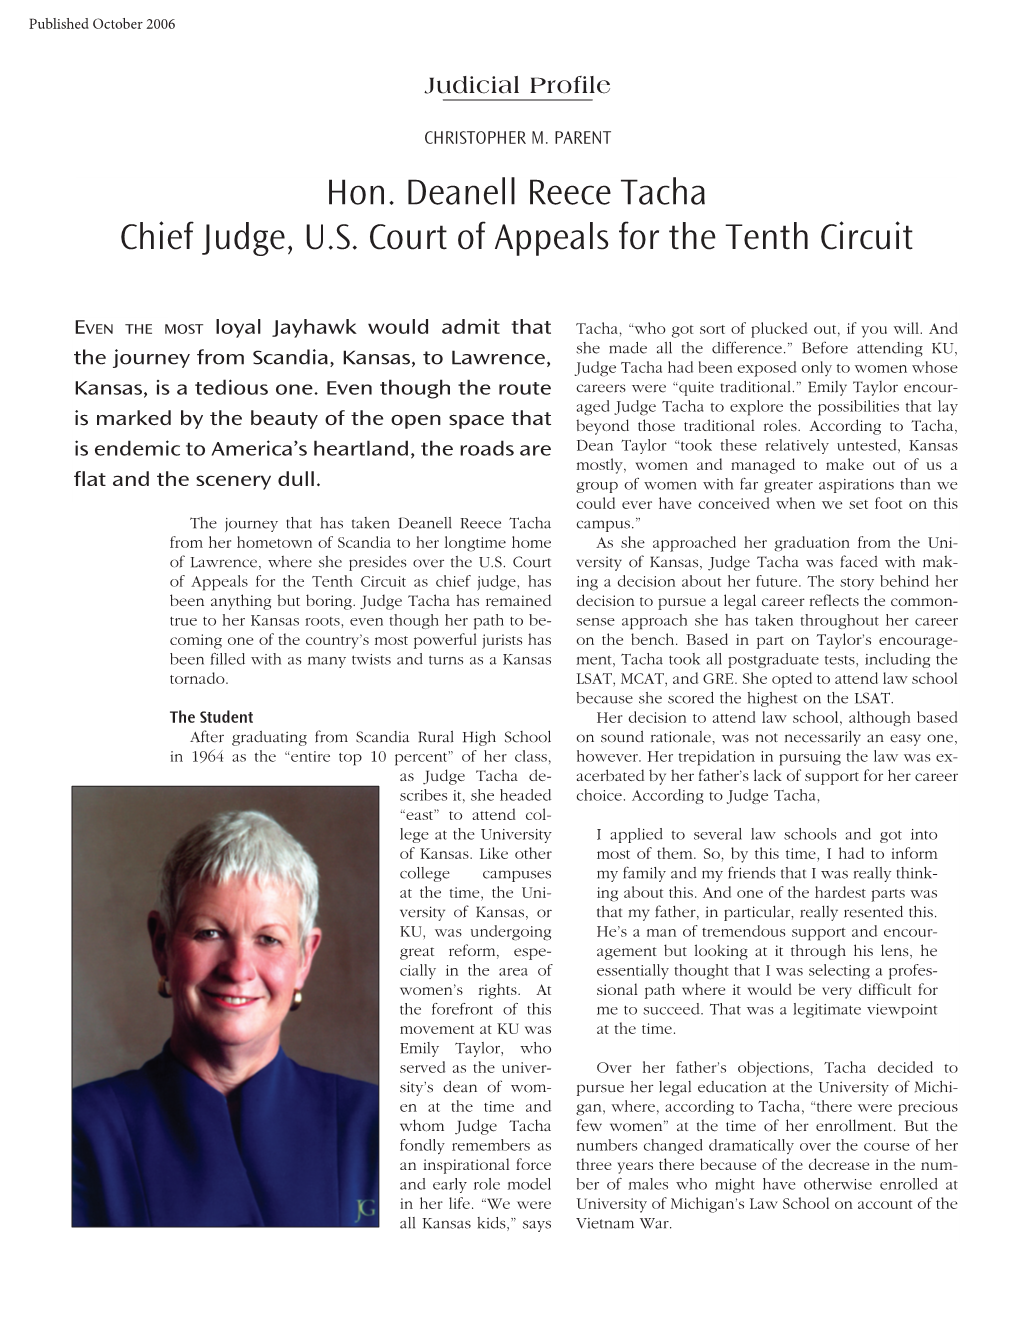 Hon. Deanell Reece Tacha Chief Judge, U.S. Court of Appeals for the Tenth Circuit